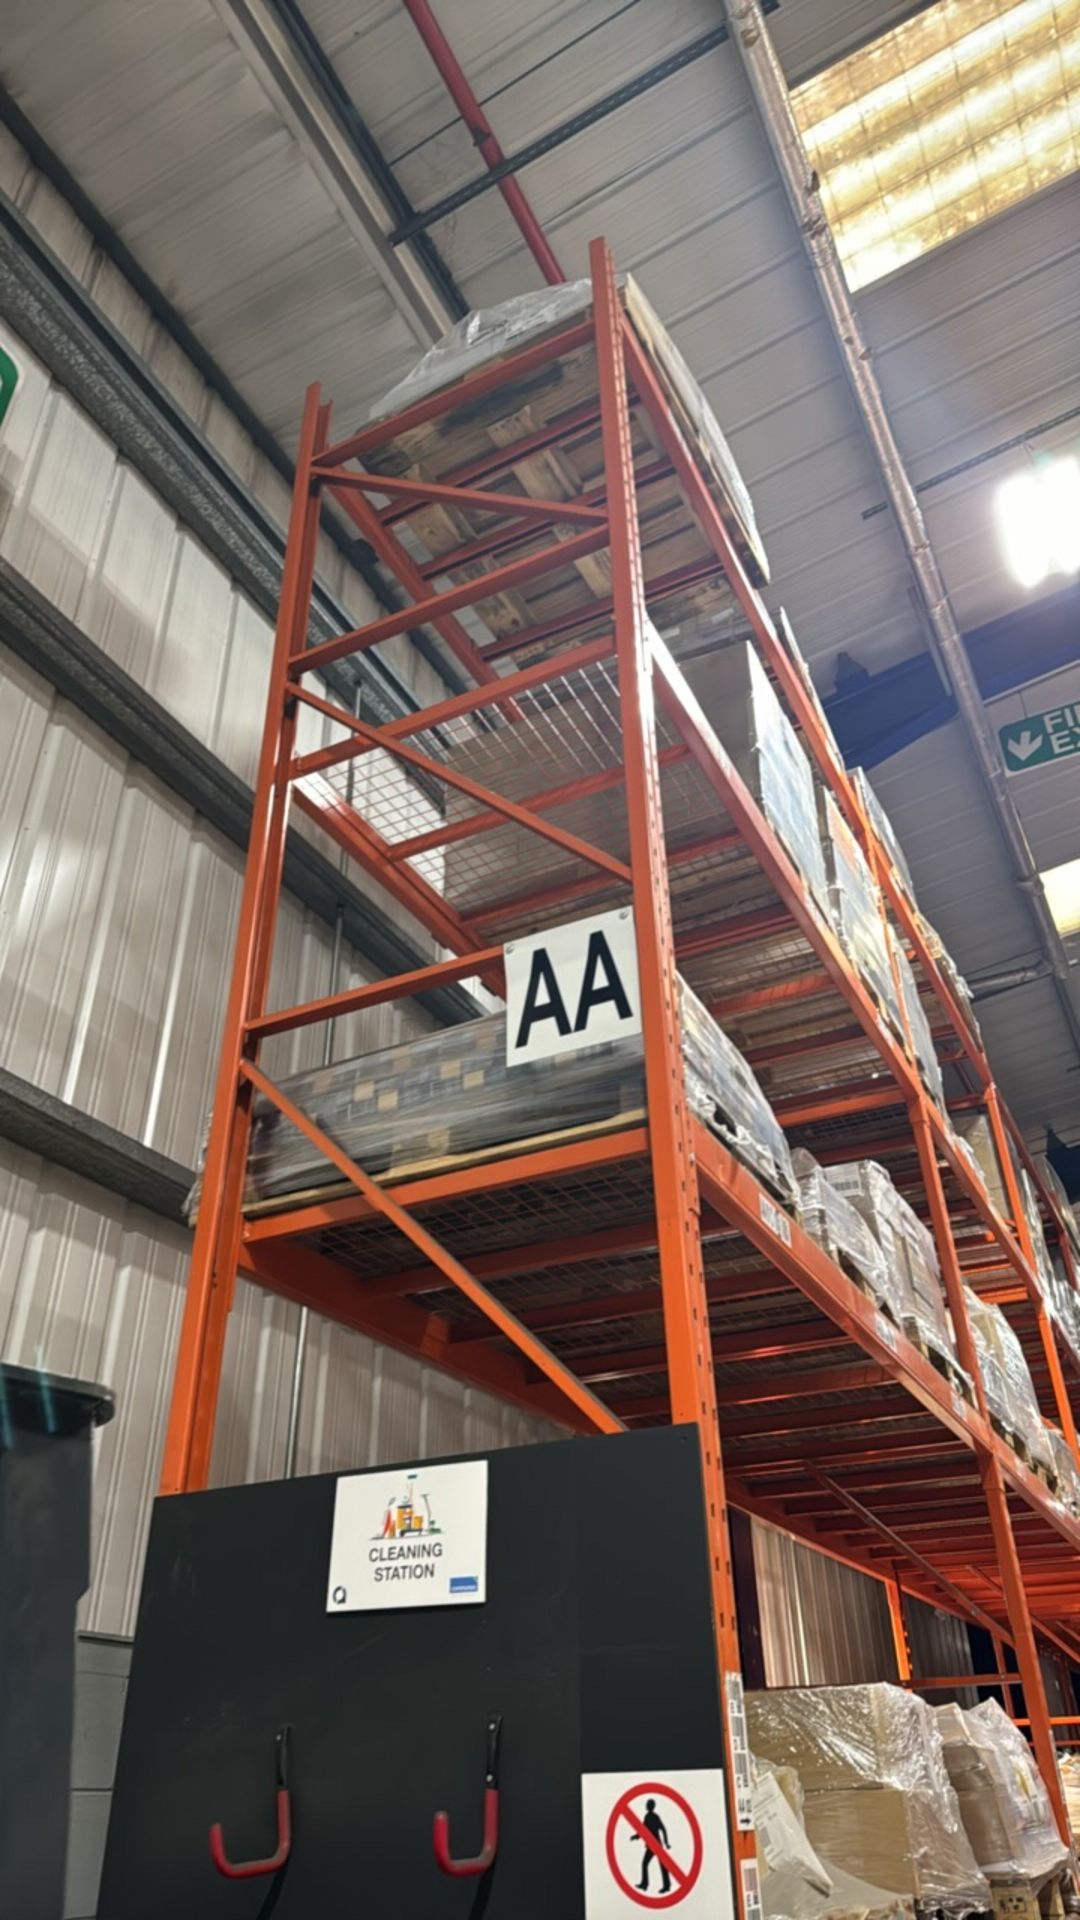 23 Bays Of Boltless Pallet Racking - Image 4 of 10